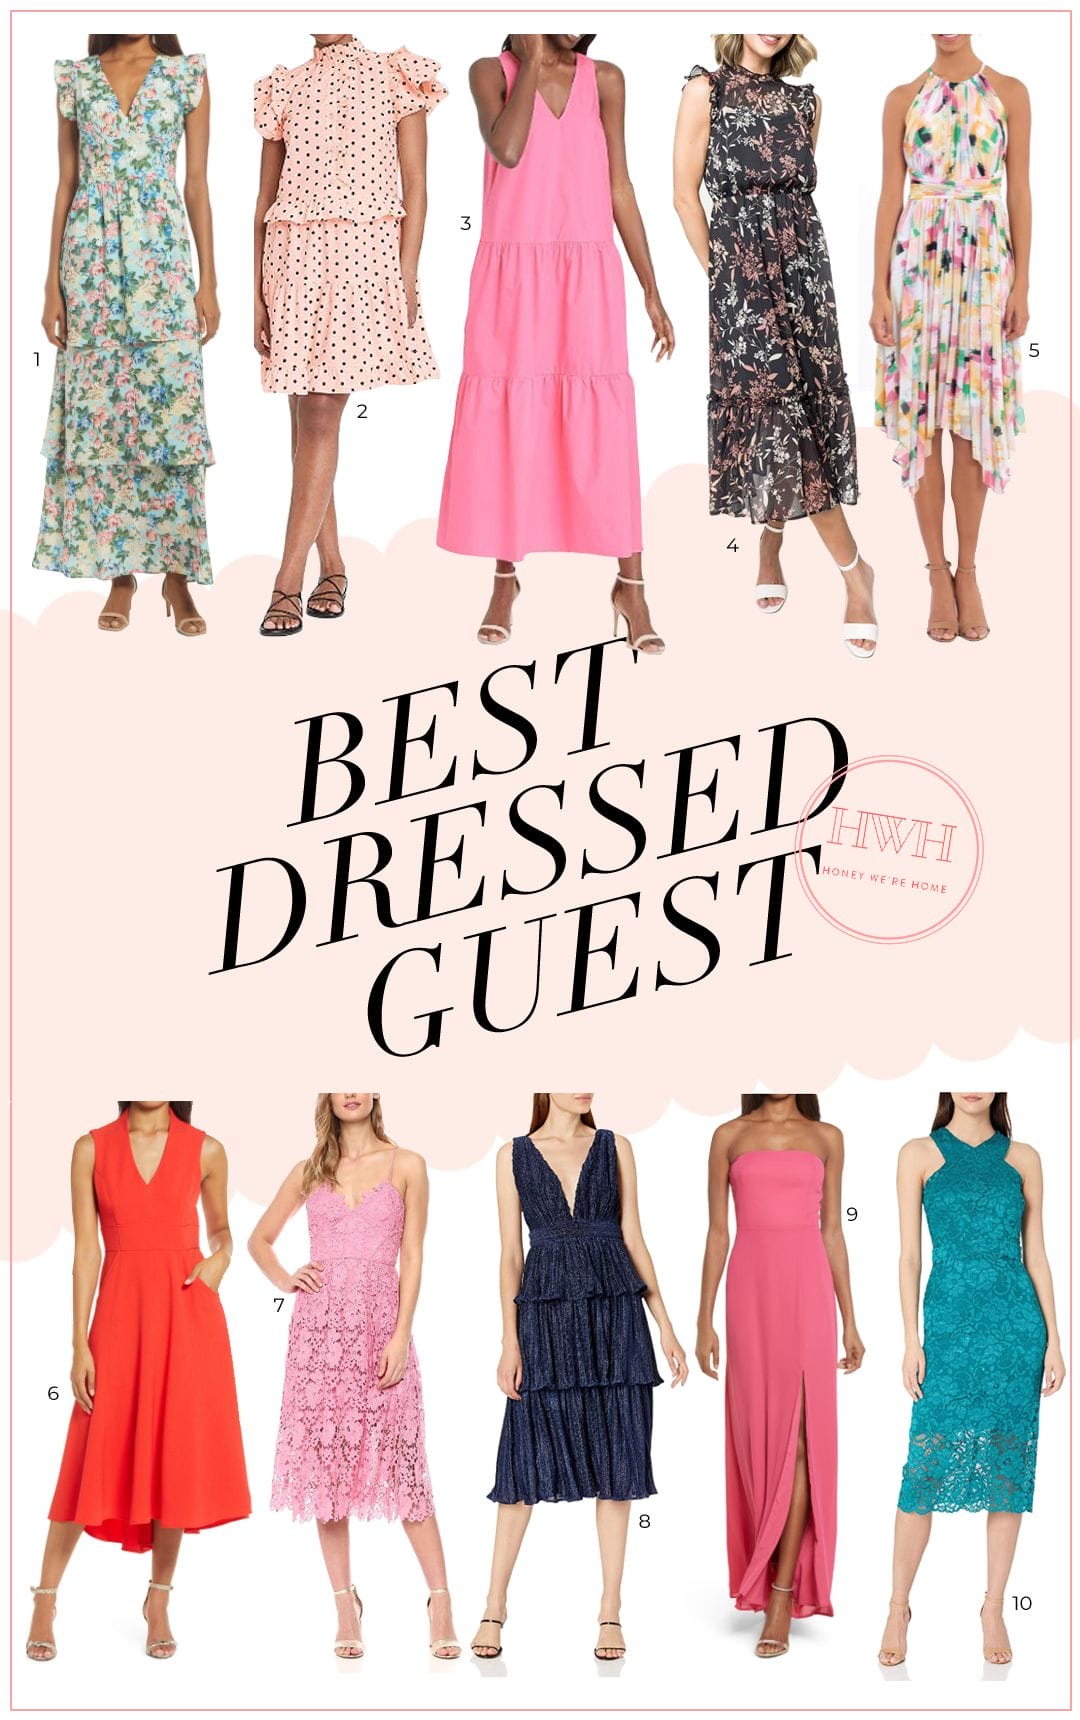 Best Dressed Wedding Guest & Vacation Style - Honey We're Home